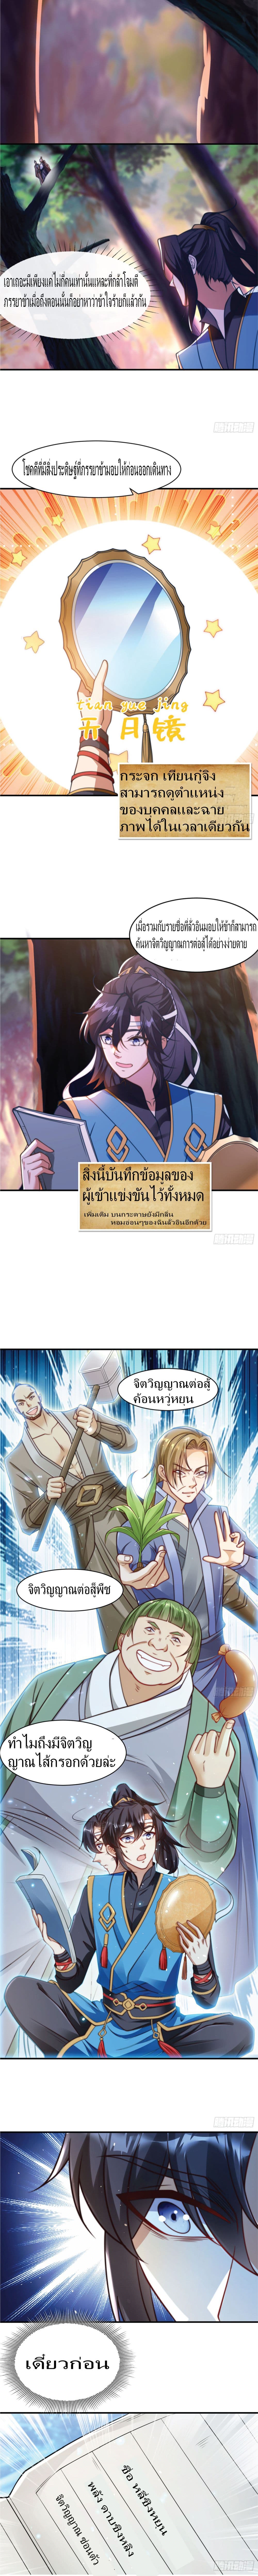 The Strongest Brother 6 แปลไทย